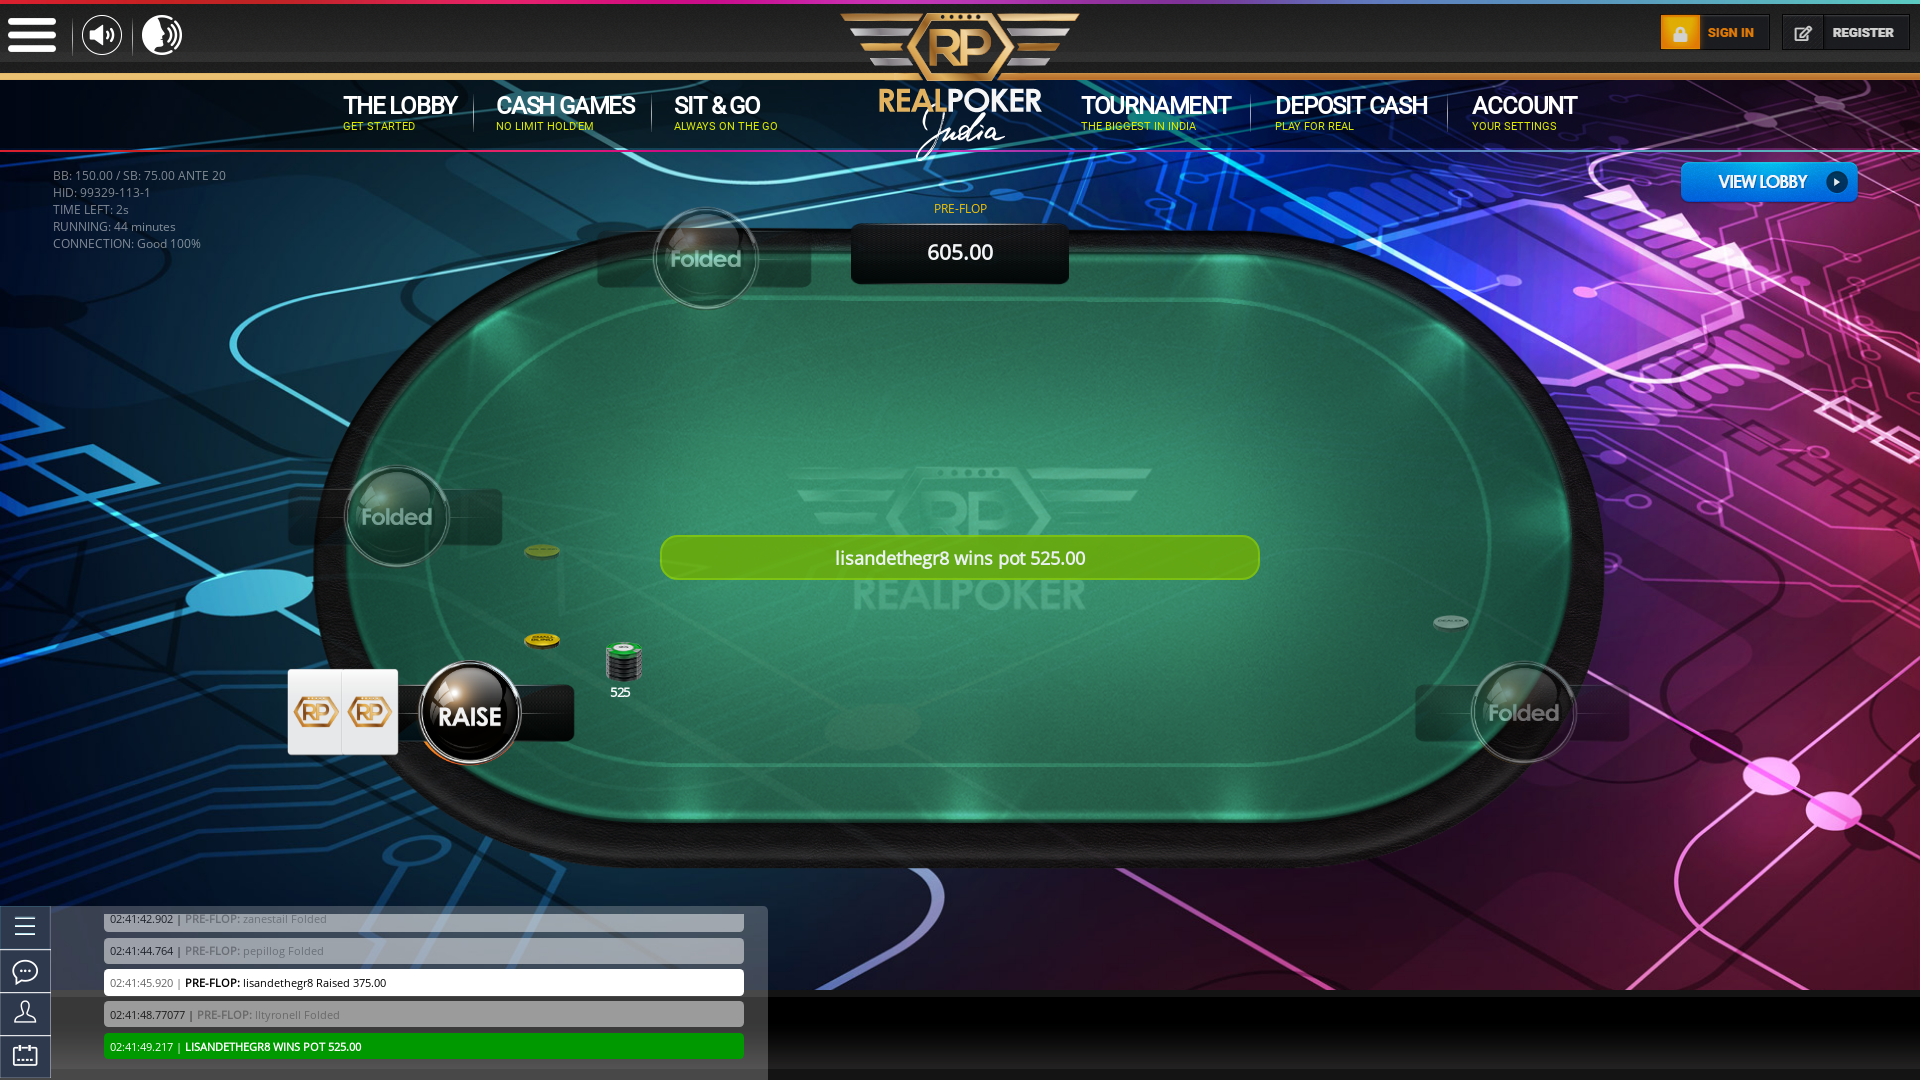 Online poker on a 10 player table in the 43rd minute match up